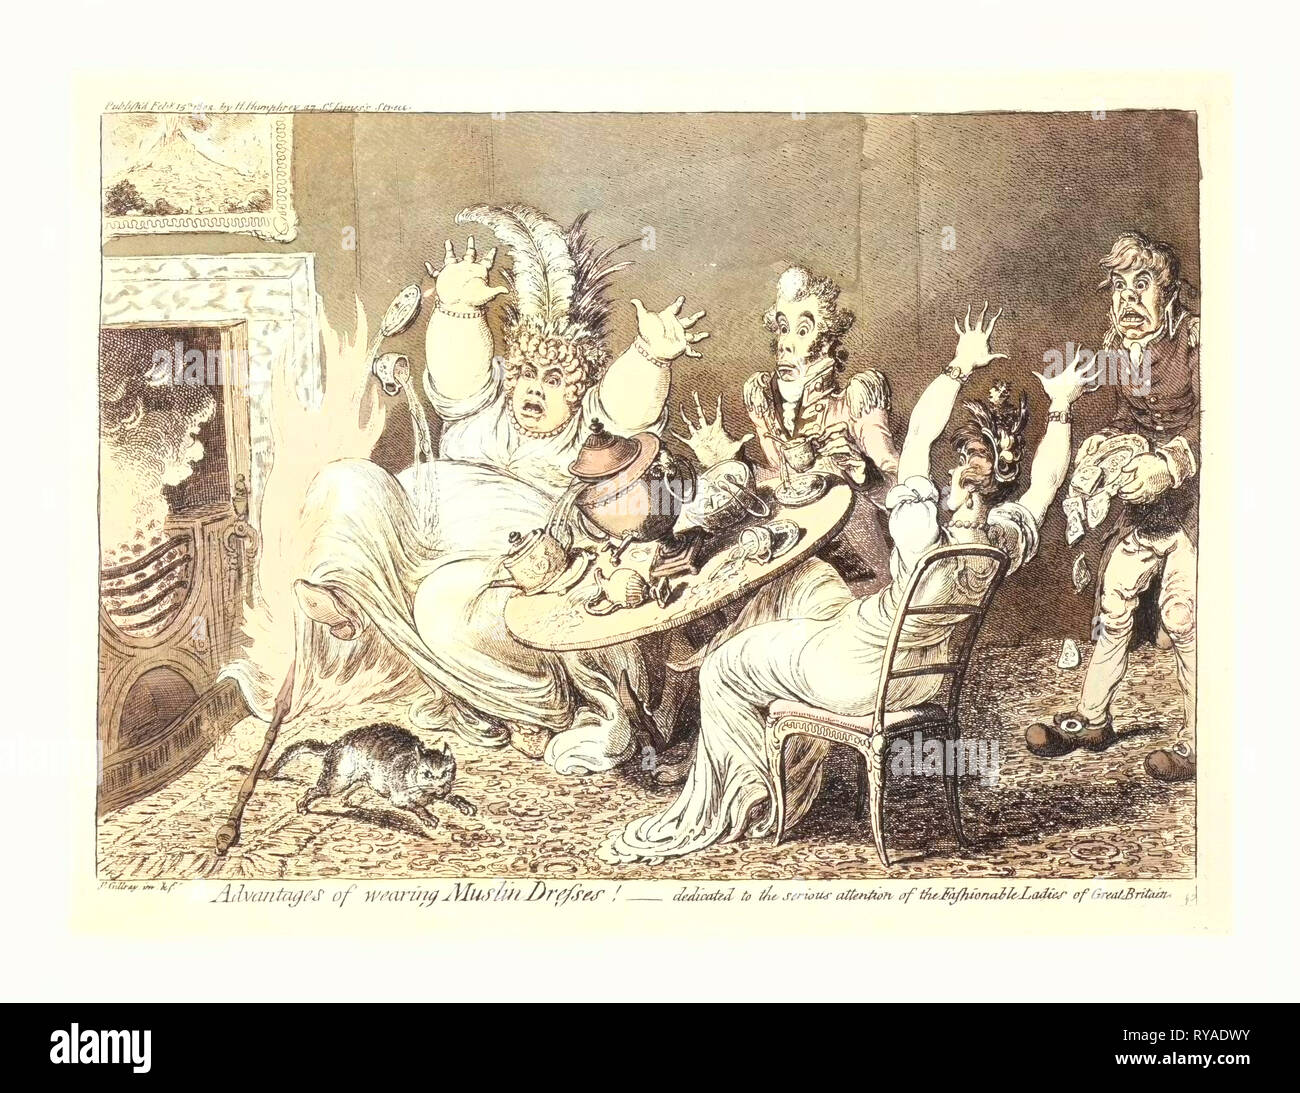 Advantages of Wearing Muslin Dresses!, Gillray, James, 1756-1815, Engraver, [London]: H. Humphrey, 1802, a Fat Lady, Sitting with a Man and Woman at a Tea Table, Reacts in Horror As a Hot Poker from the Fire Falls on Her Dress and Sets It on Fire. The Man Sits Helplessly While the Second Woman Upsets the Table in Her Alarm. A Butler, Entering the Room, Drops a Plate of Muffins, and a Cat Scampers Away from the Fire. A Painting of Mt. Vesuvius Hangs Over the Fireplace Stock Photo